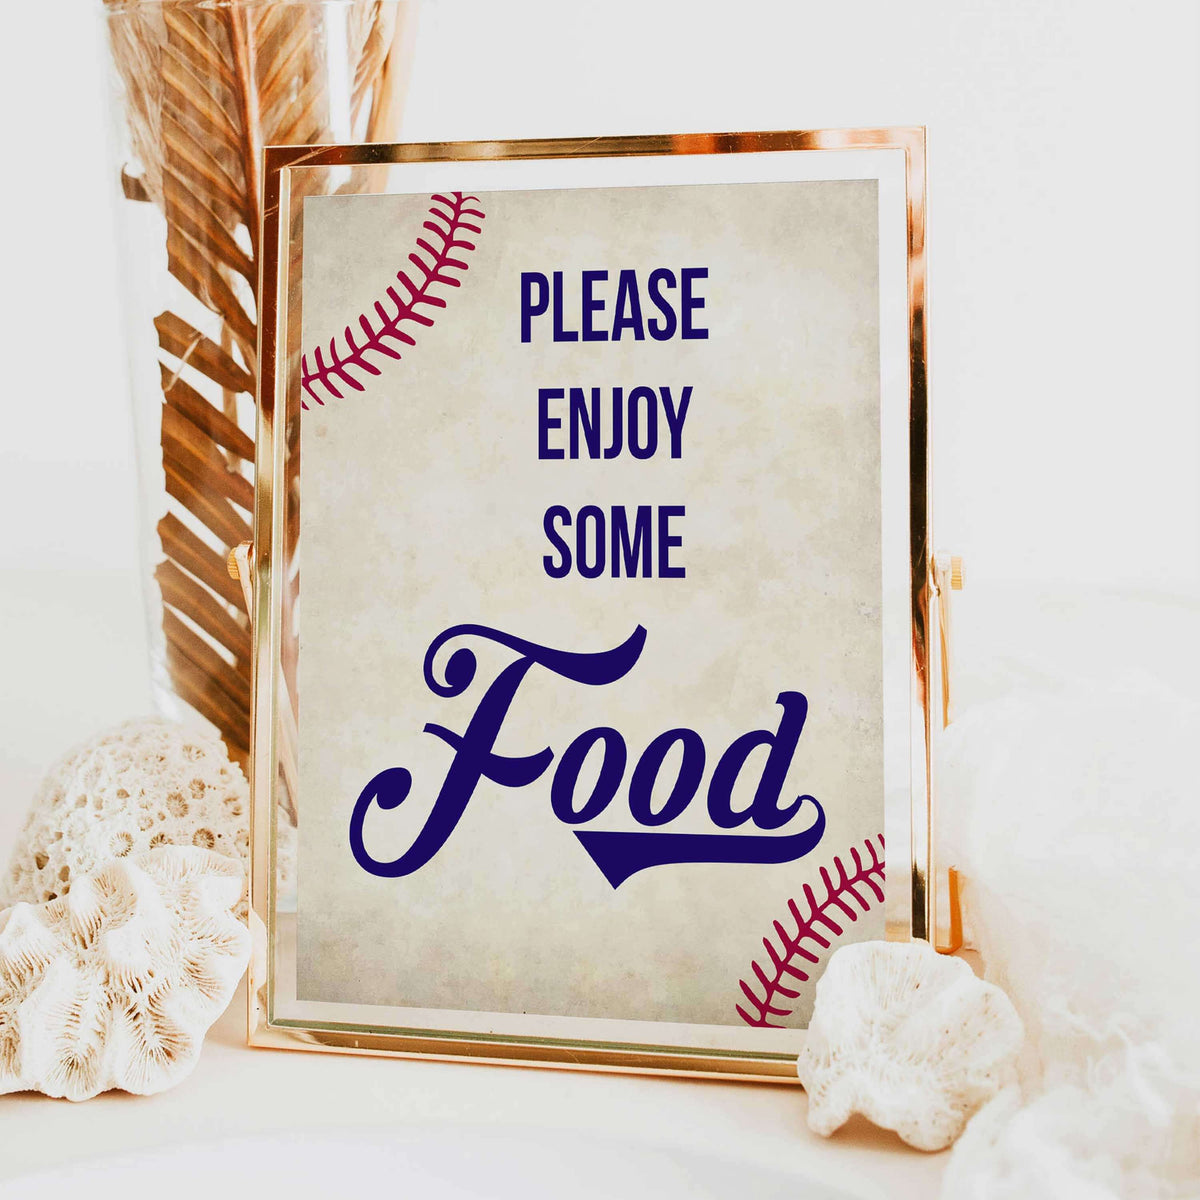 Food baby signs, food table signs, Baseball baby signs, baseball baby decor, printable baby shower decor, fun baby decor, baby food signs, printable baby shower ideas